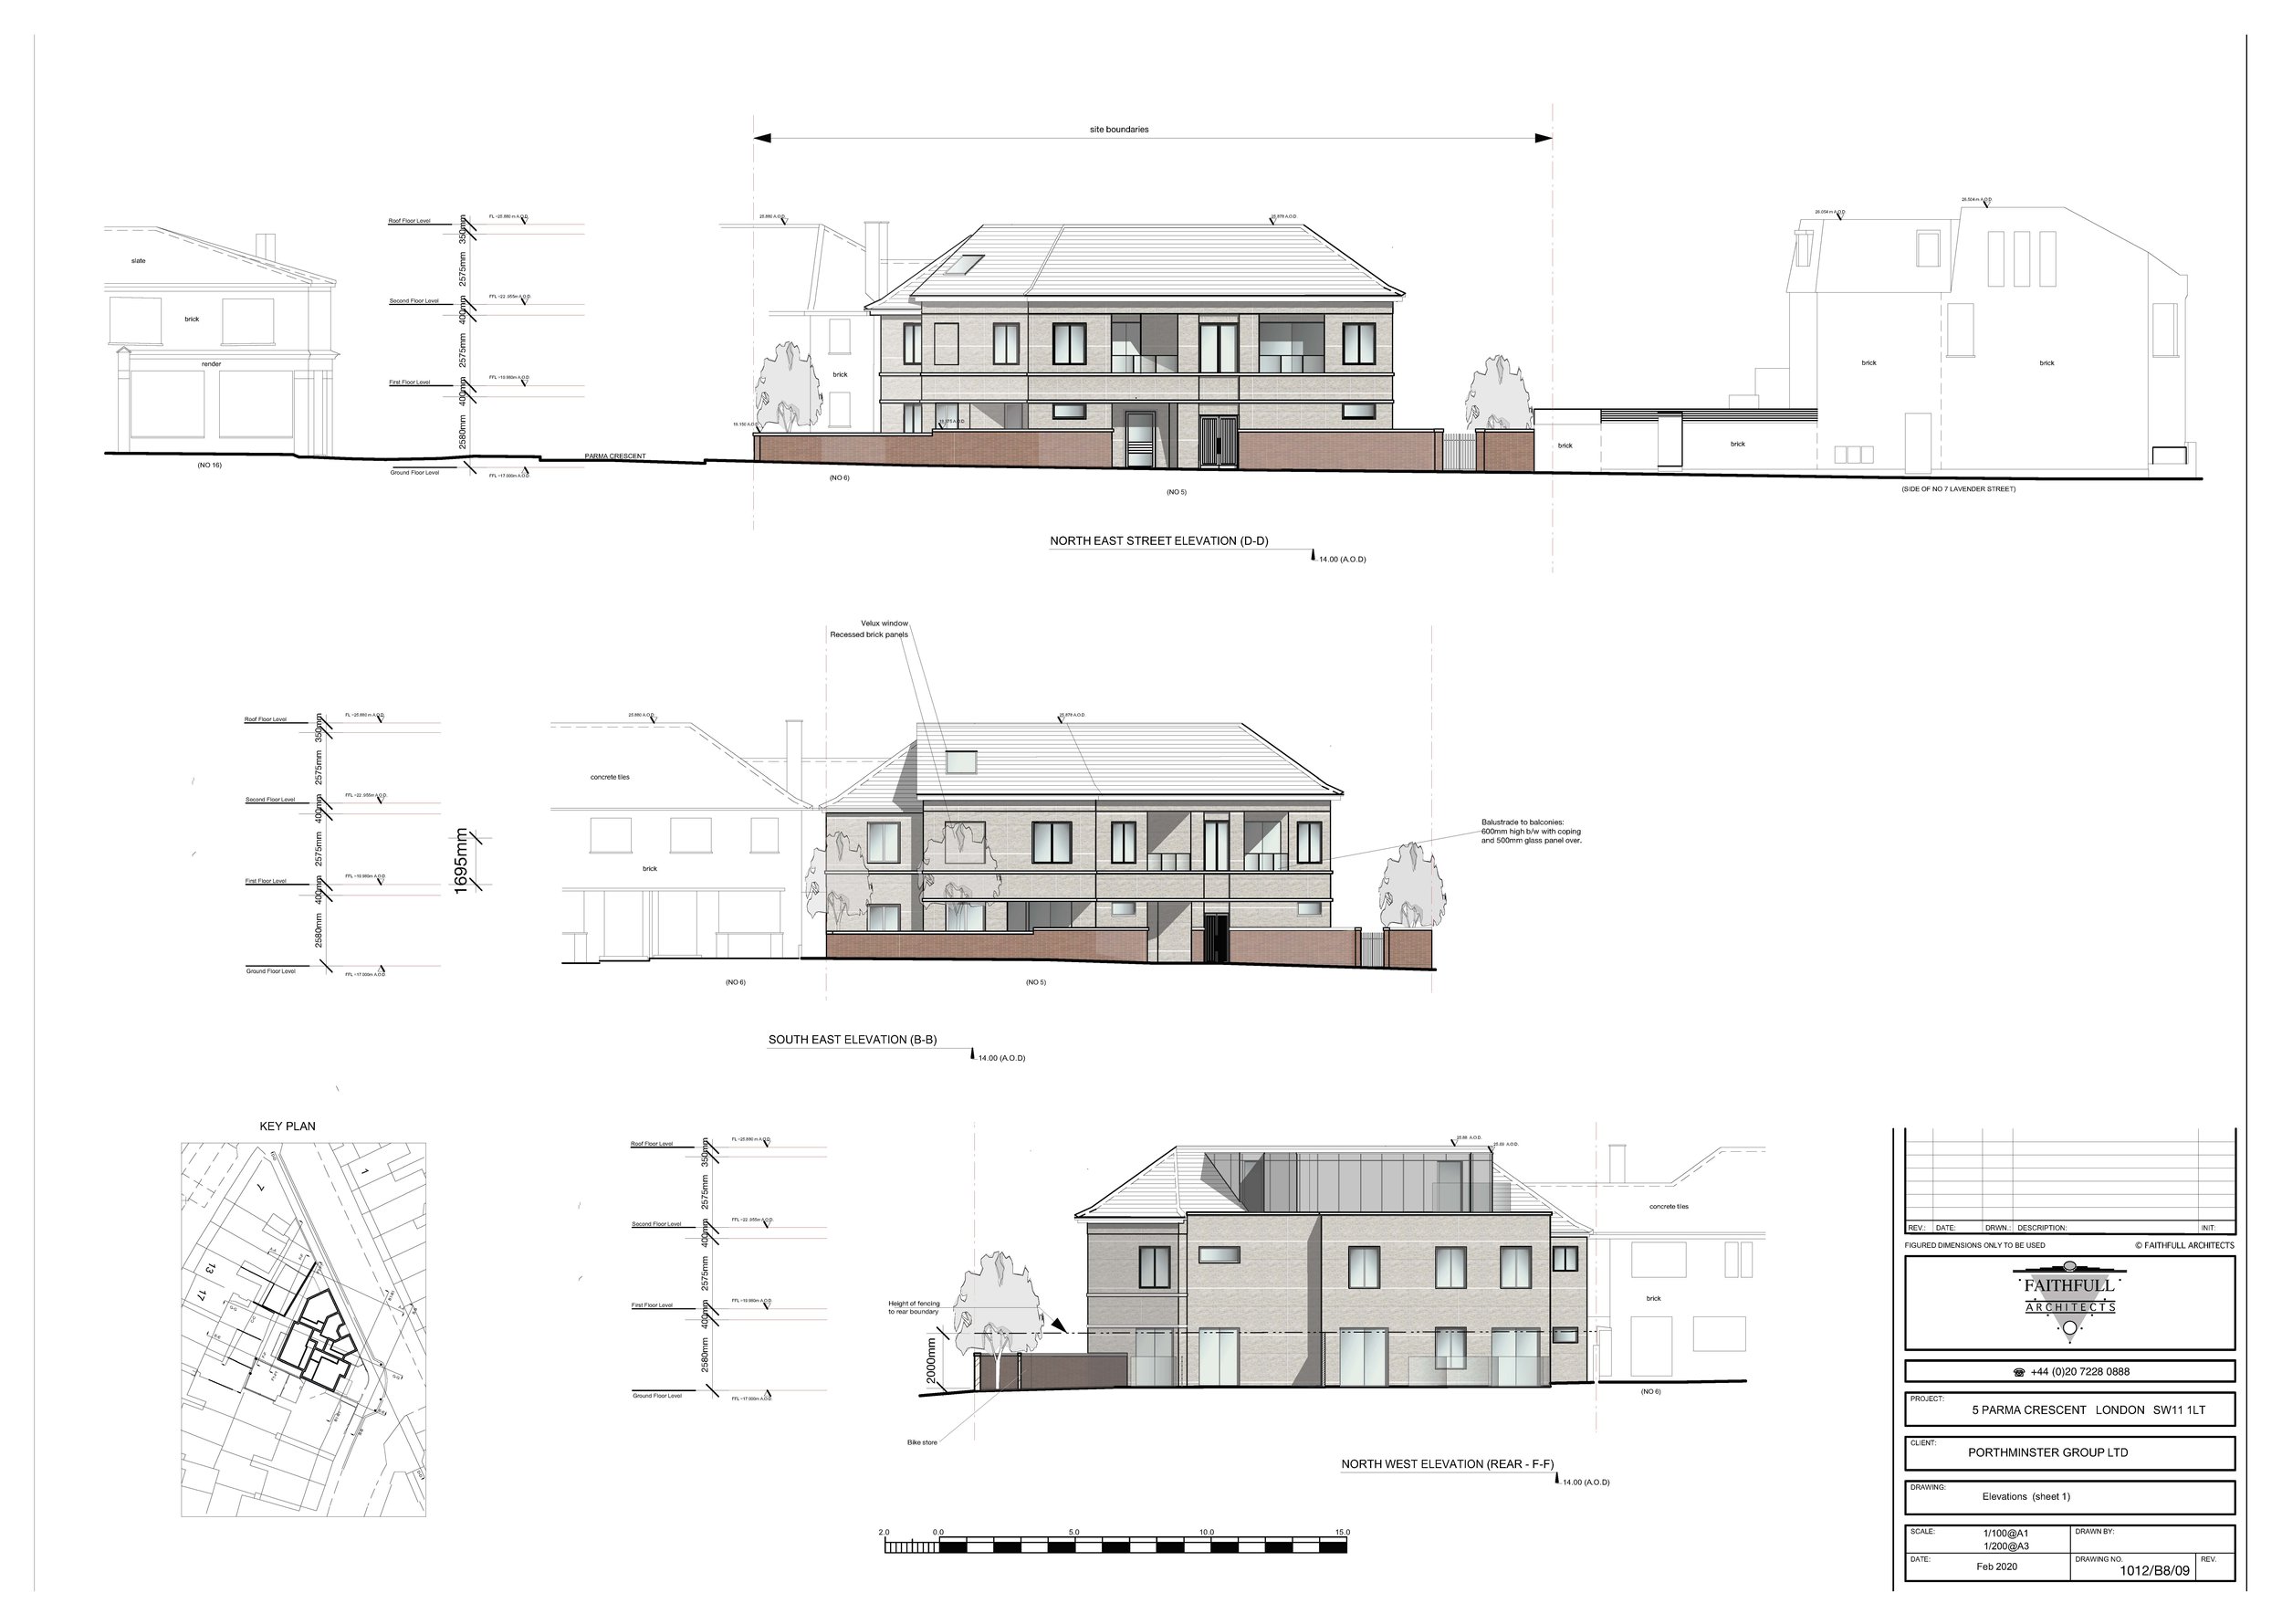 Proposed Plans Elevations Sections 7 flats_Page_6.jpg